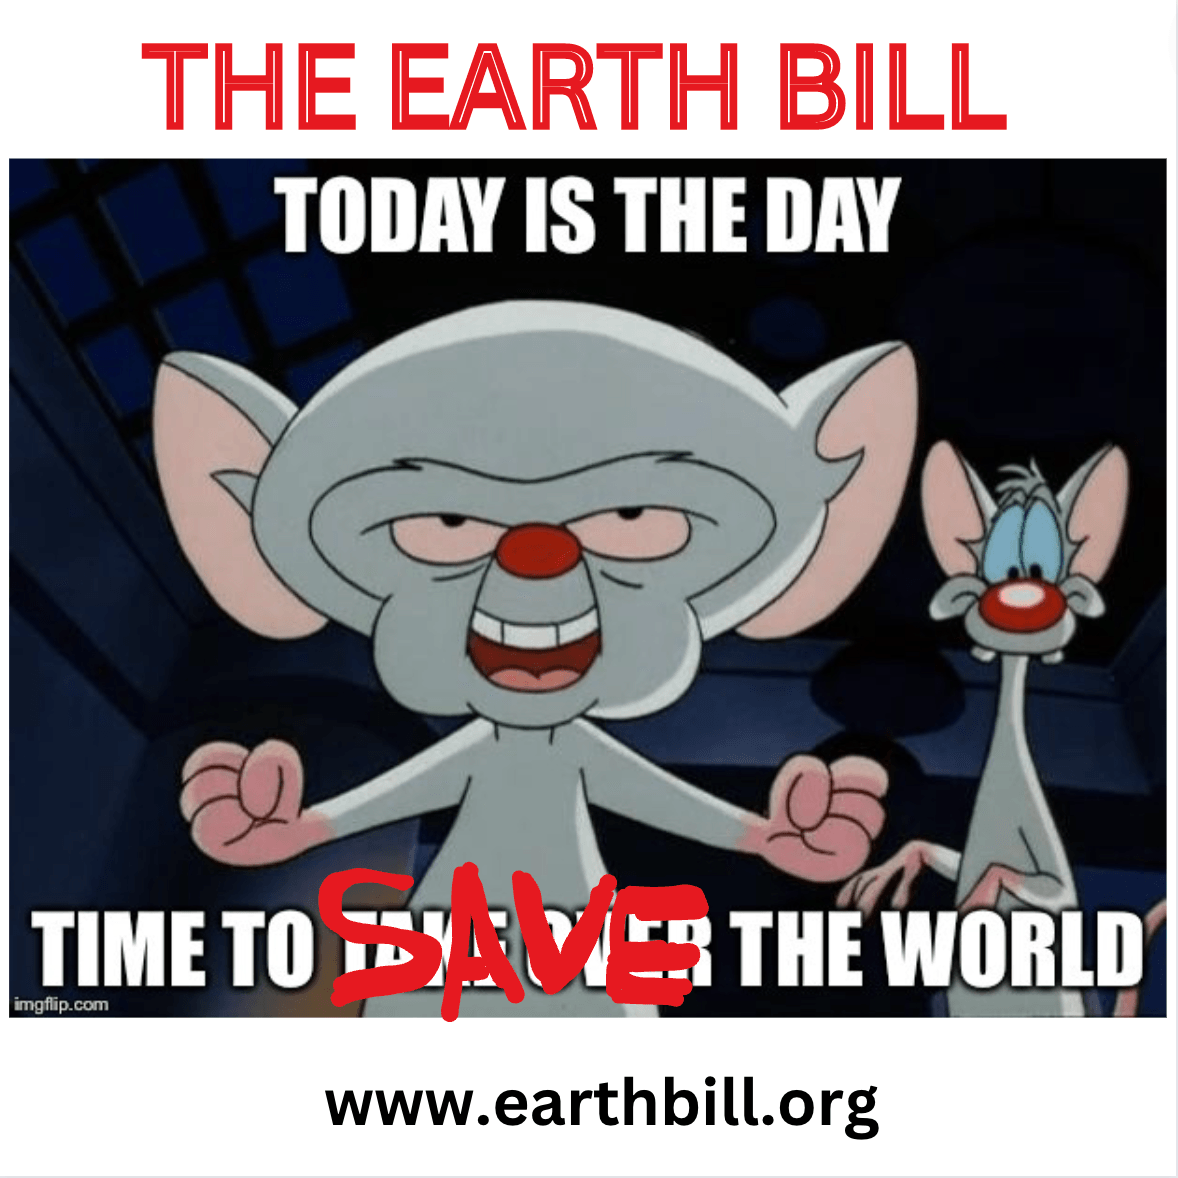 The Earth Bill. Today is the day. Time to save the world. With that text over a meme of a mouse and a cat. www.theearthbill.org